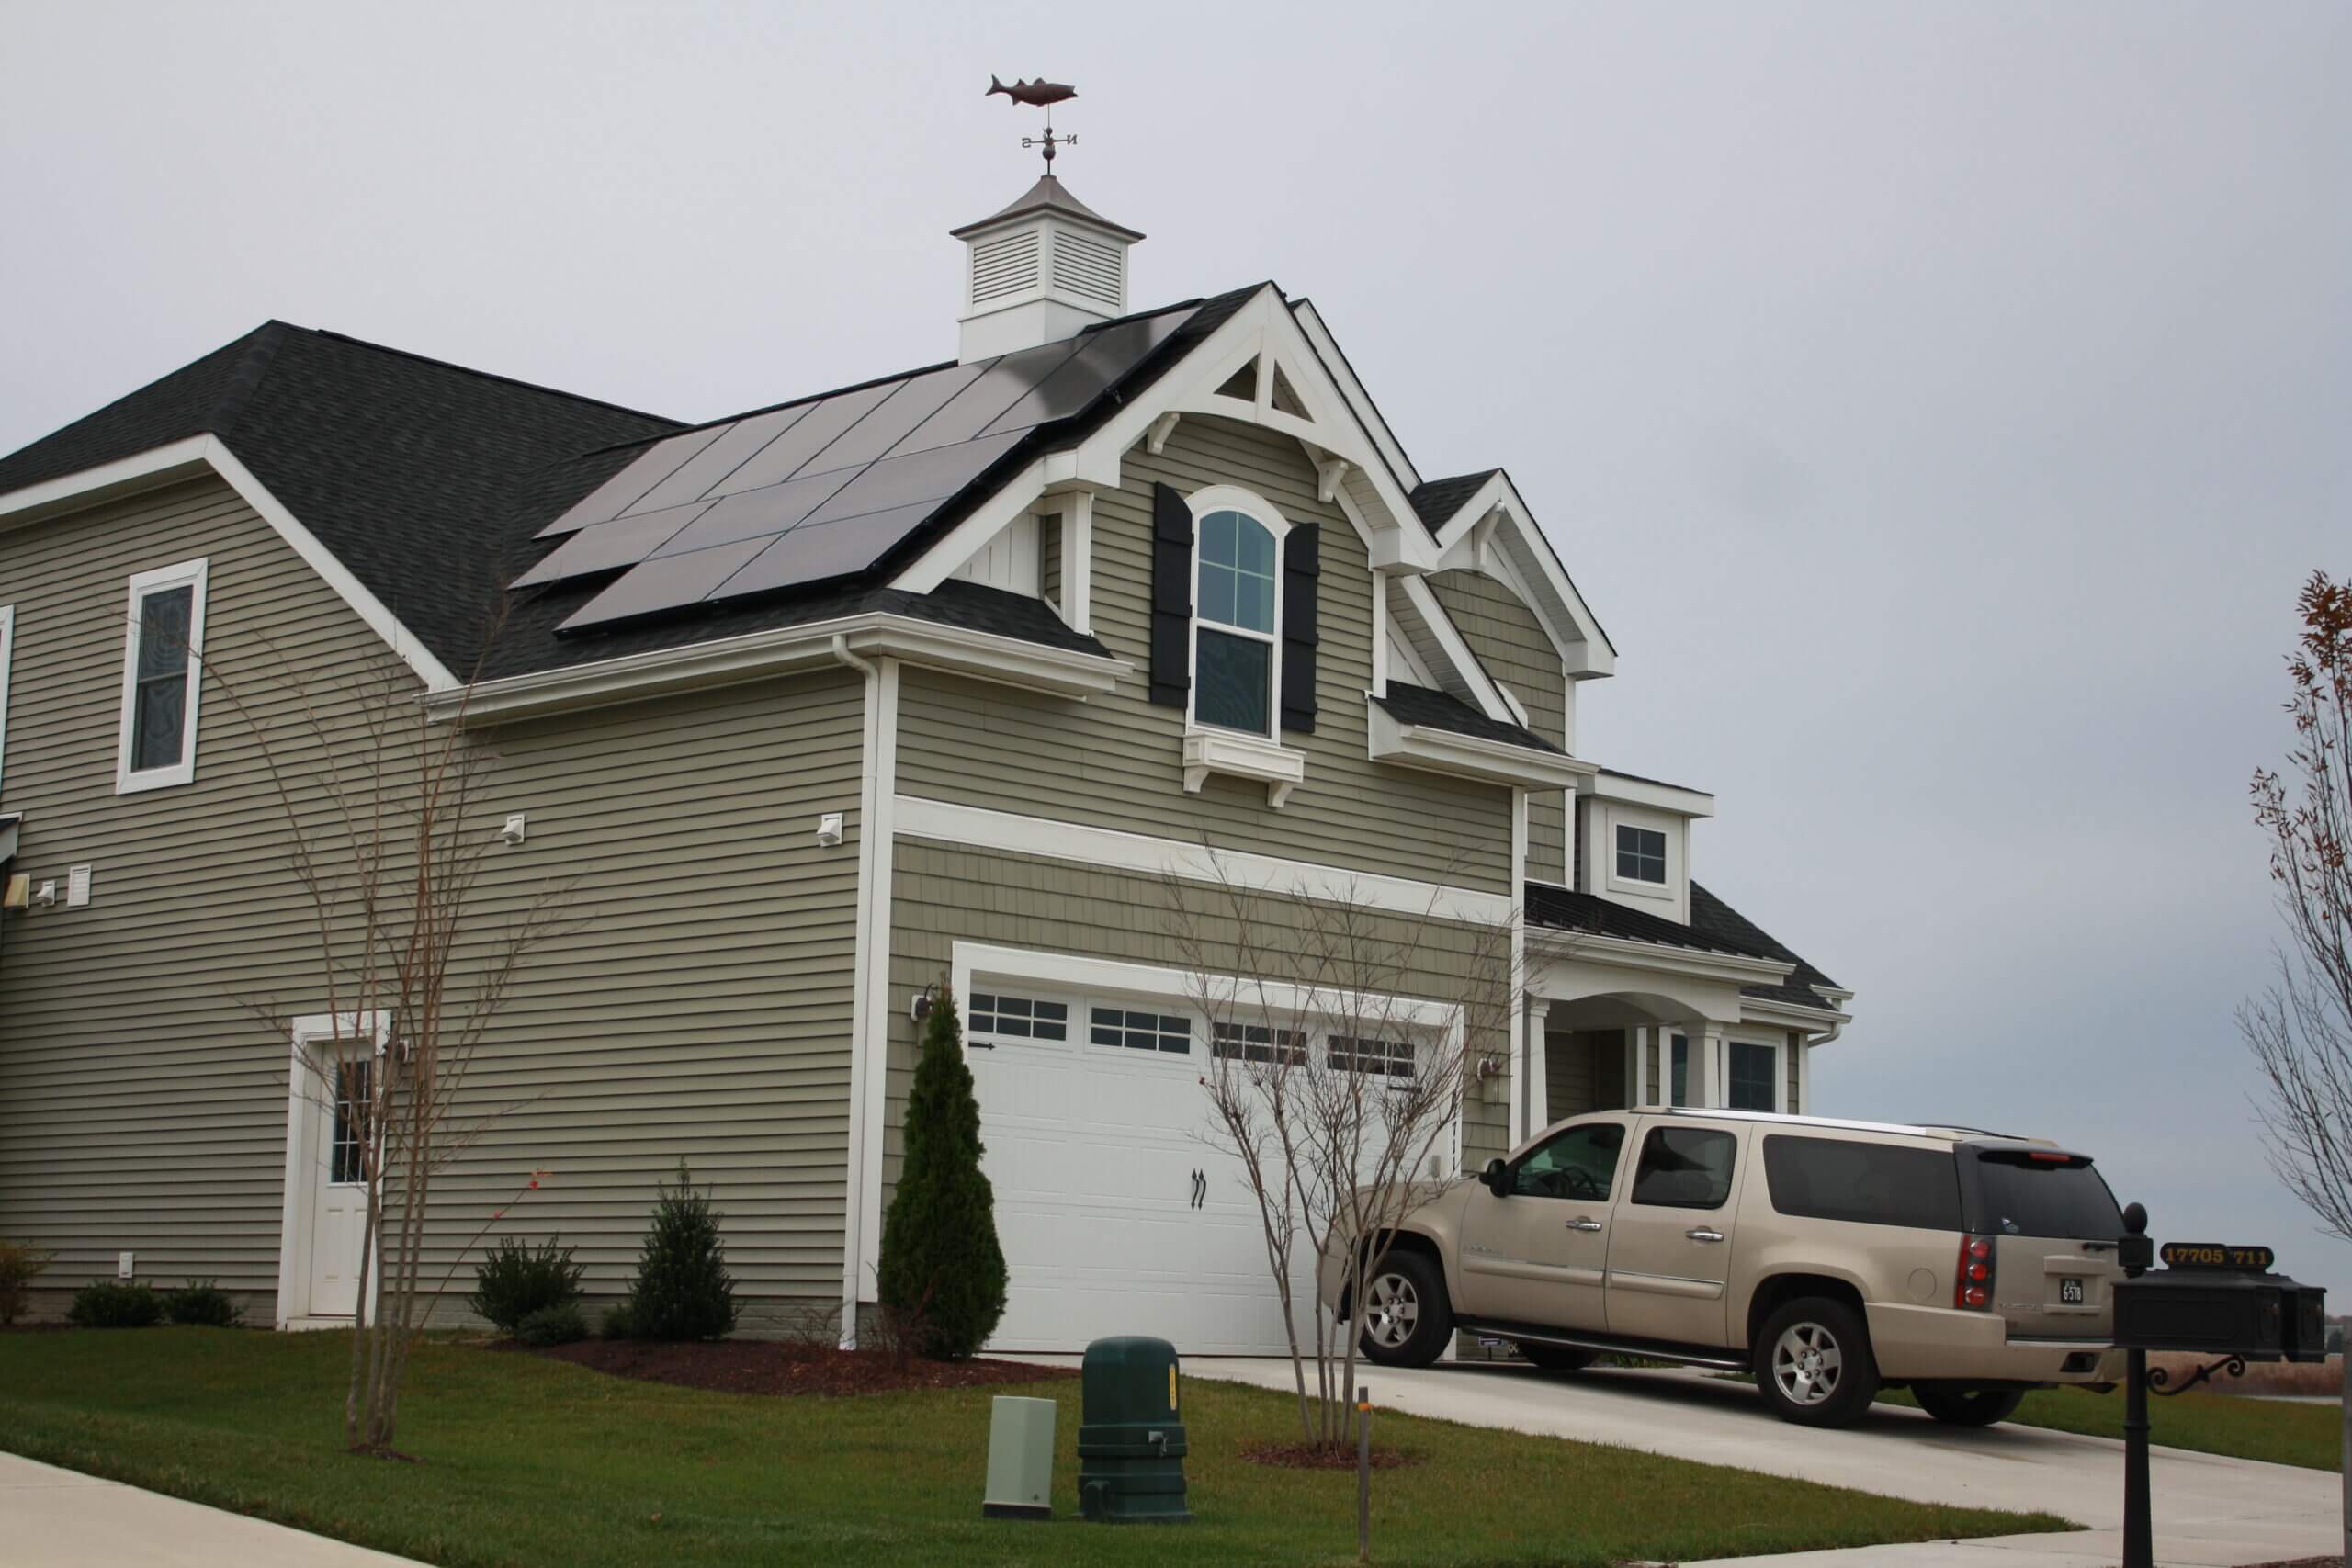 Residential home with Boviet solar panel PV modules